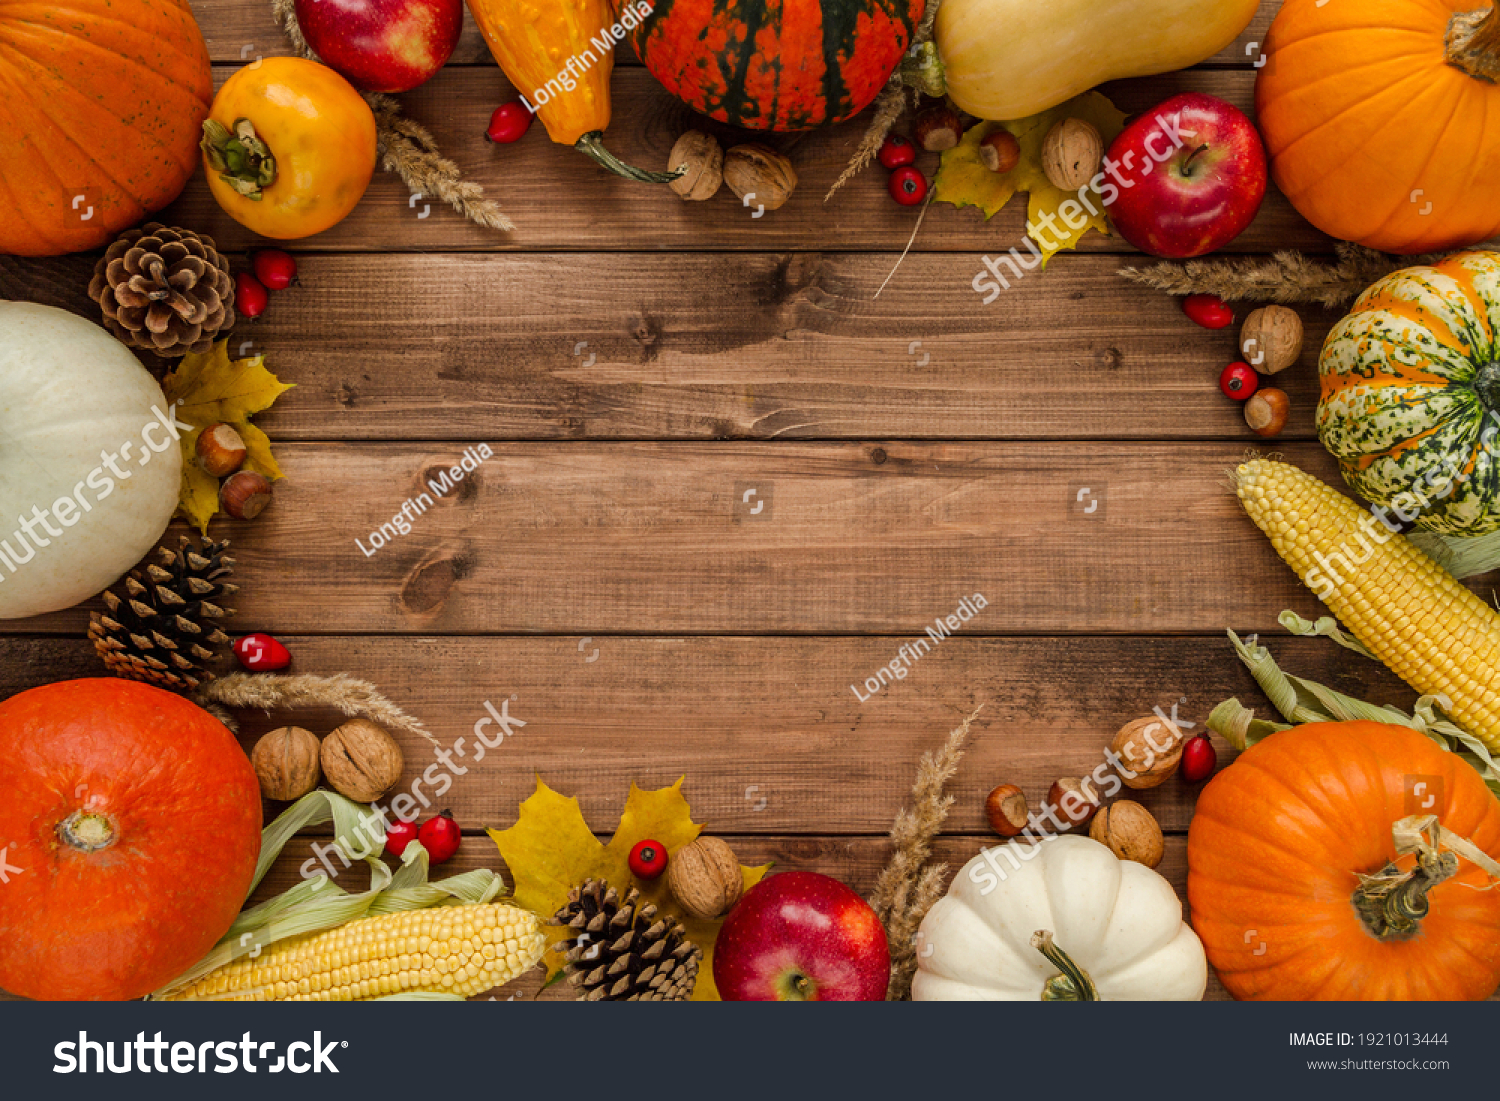 Variety of gourds, squash types and pumpkins. Flat lay composition frame with walnuts, hazelnuts, apples, cones, rosehips, kaki and corn on the cob. Copyspace on wooden background. #1921013444